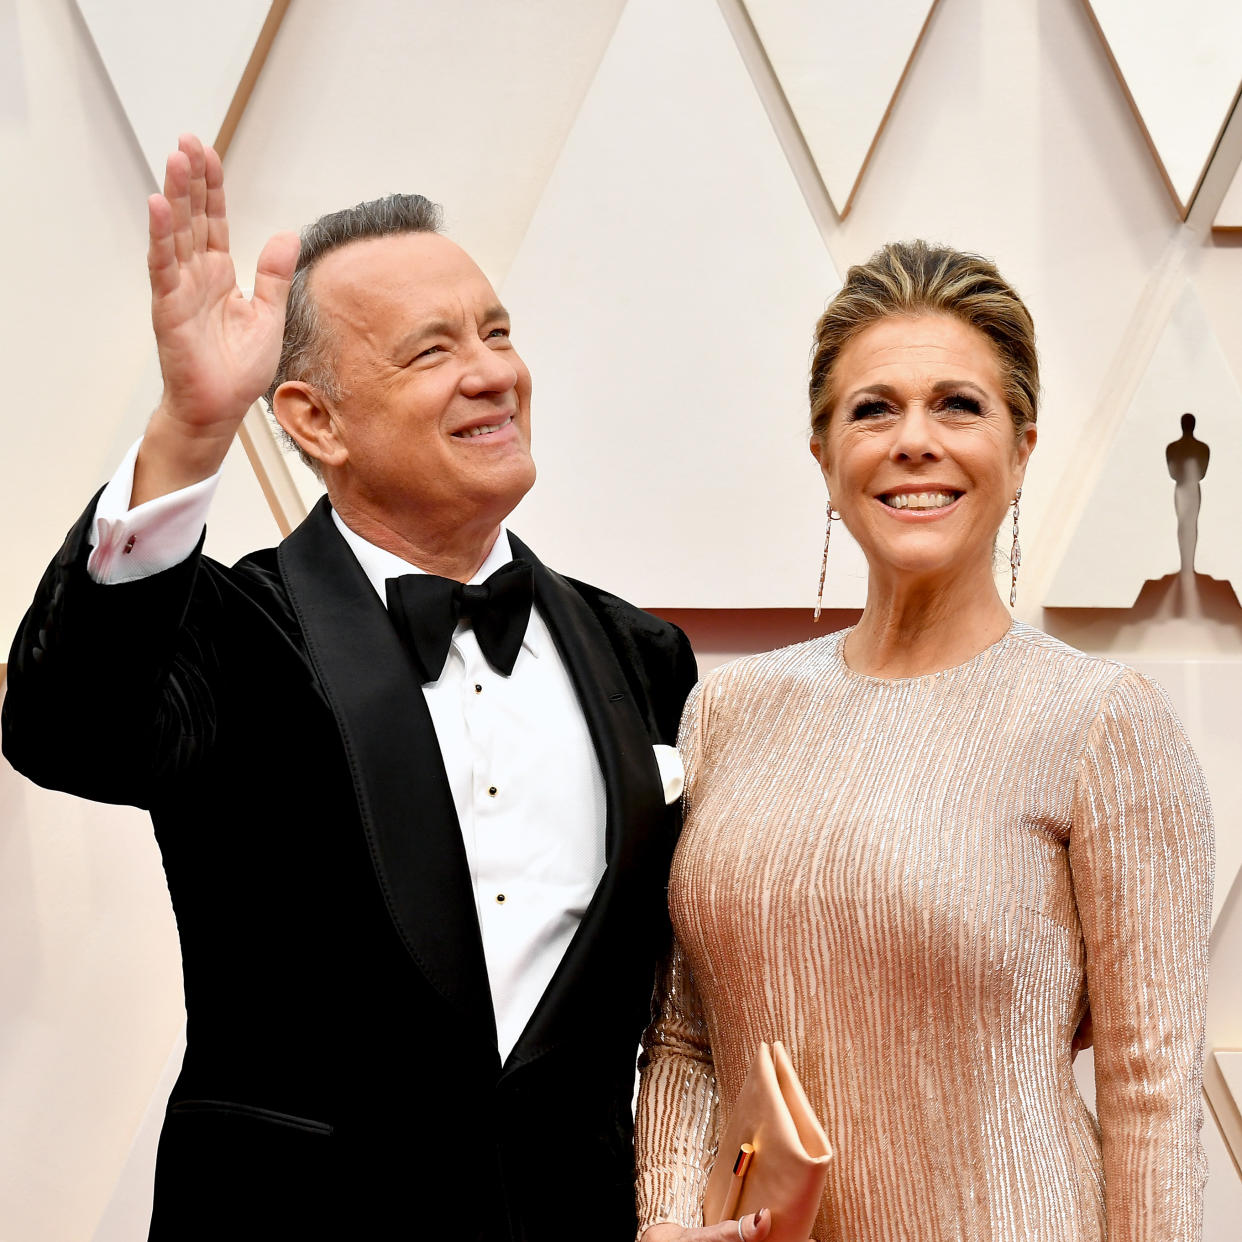 Tom Hanks and Rita Wilson wave to the crowd at the 92nd Annual Academy Awards at Hollywood and Highland on February 09, 2020 in Hollywood, California.